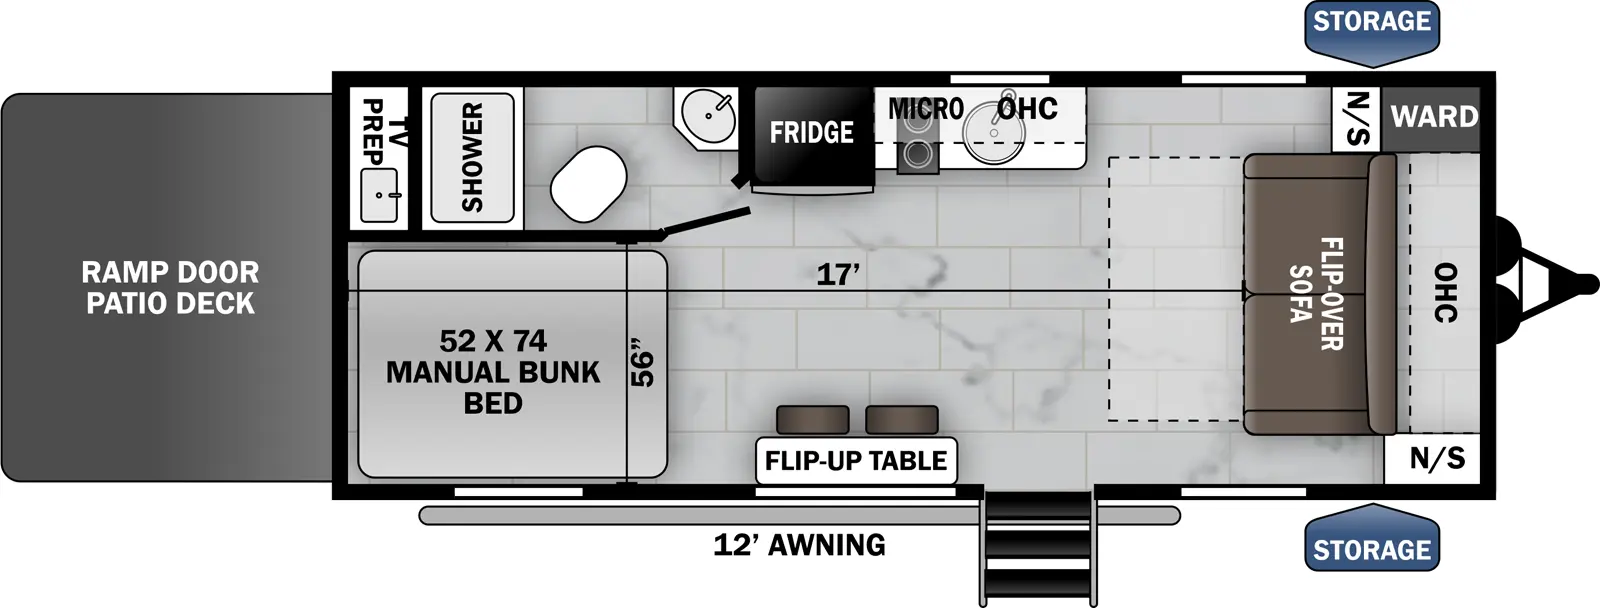 The 22-17 has zero slideouts, one entry, and a rear ramp door. Exterior features storage and a 12 foot awning. Interior layout front to back: flip-over sofa with overhead cabinet, off-door side wardrobe, and nightstands on each side; door side entry and flip-up table with seats; off-door side kitchen counter with sink, cooktop, overhead cabinet, microwave, and refrigerator; door side rear manual bunk bed; rear off-door side full bathroom; sink and TV prep along rear wall of bathroom facing the ramp door. Garage dimensions: 17 foot from rear to front flip-over sofa; 56 inches from door side to bathroom wall.